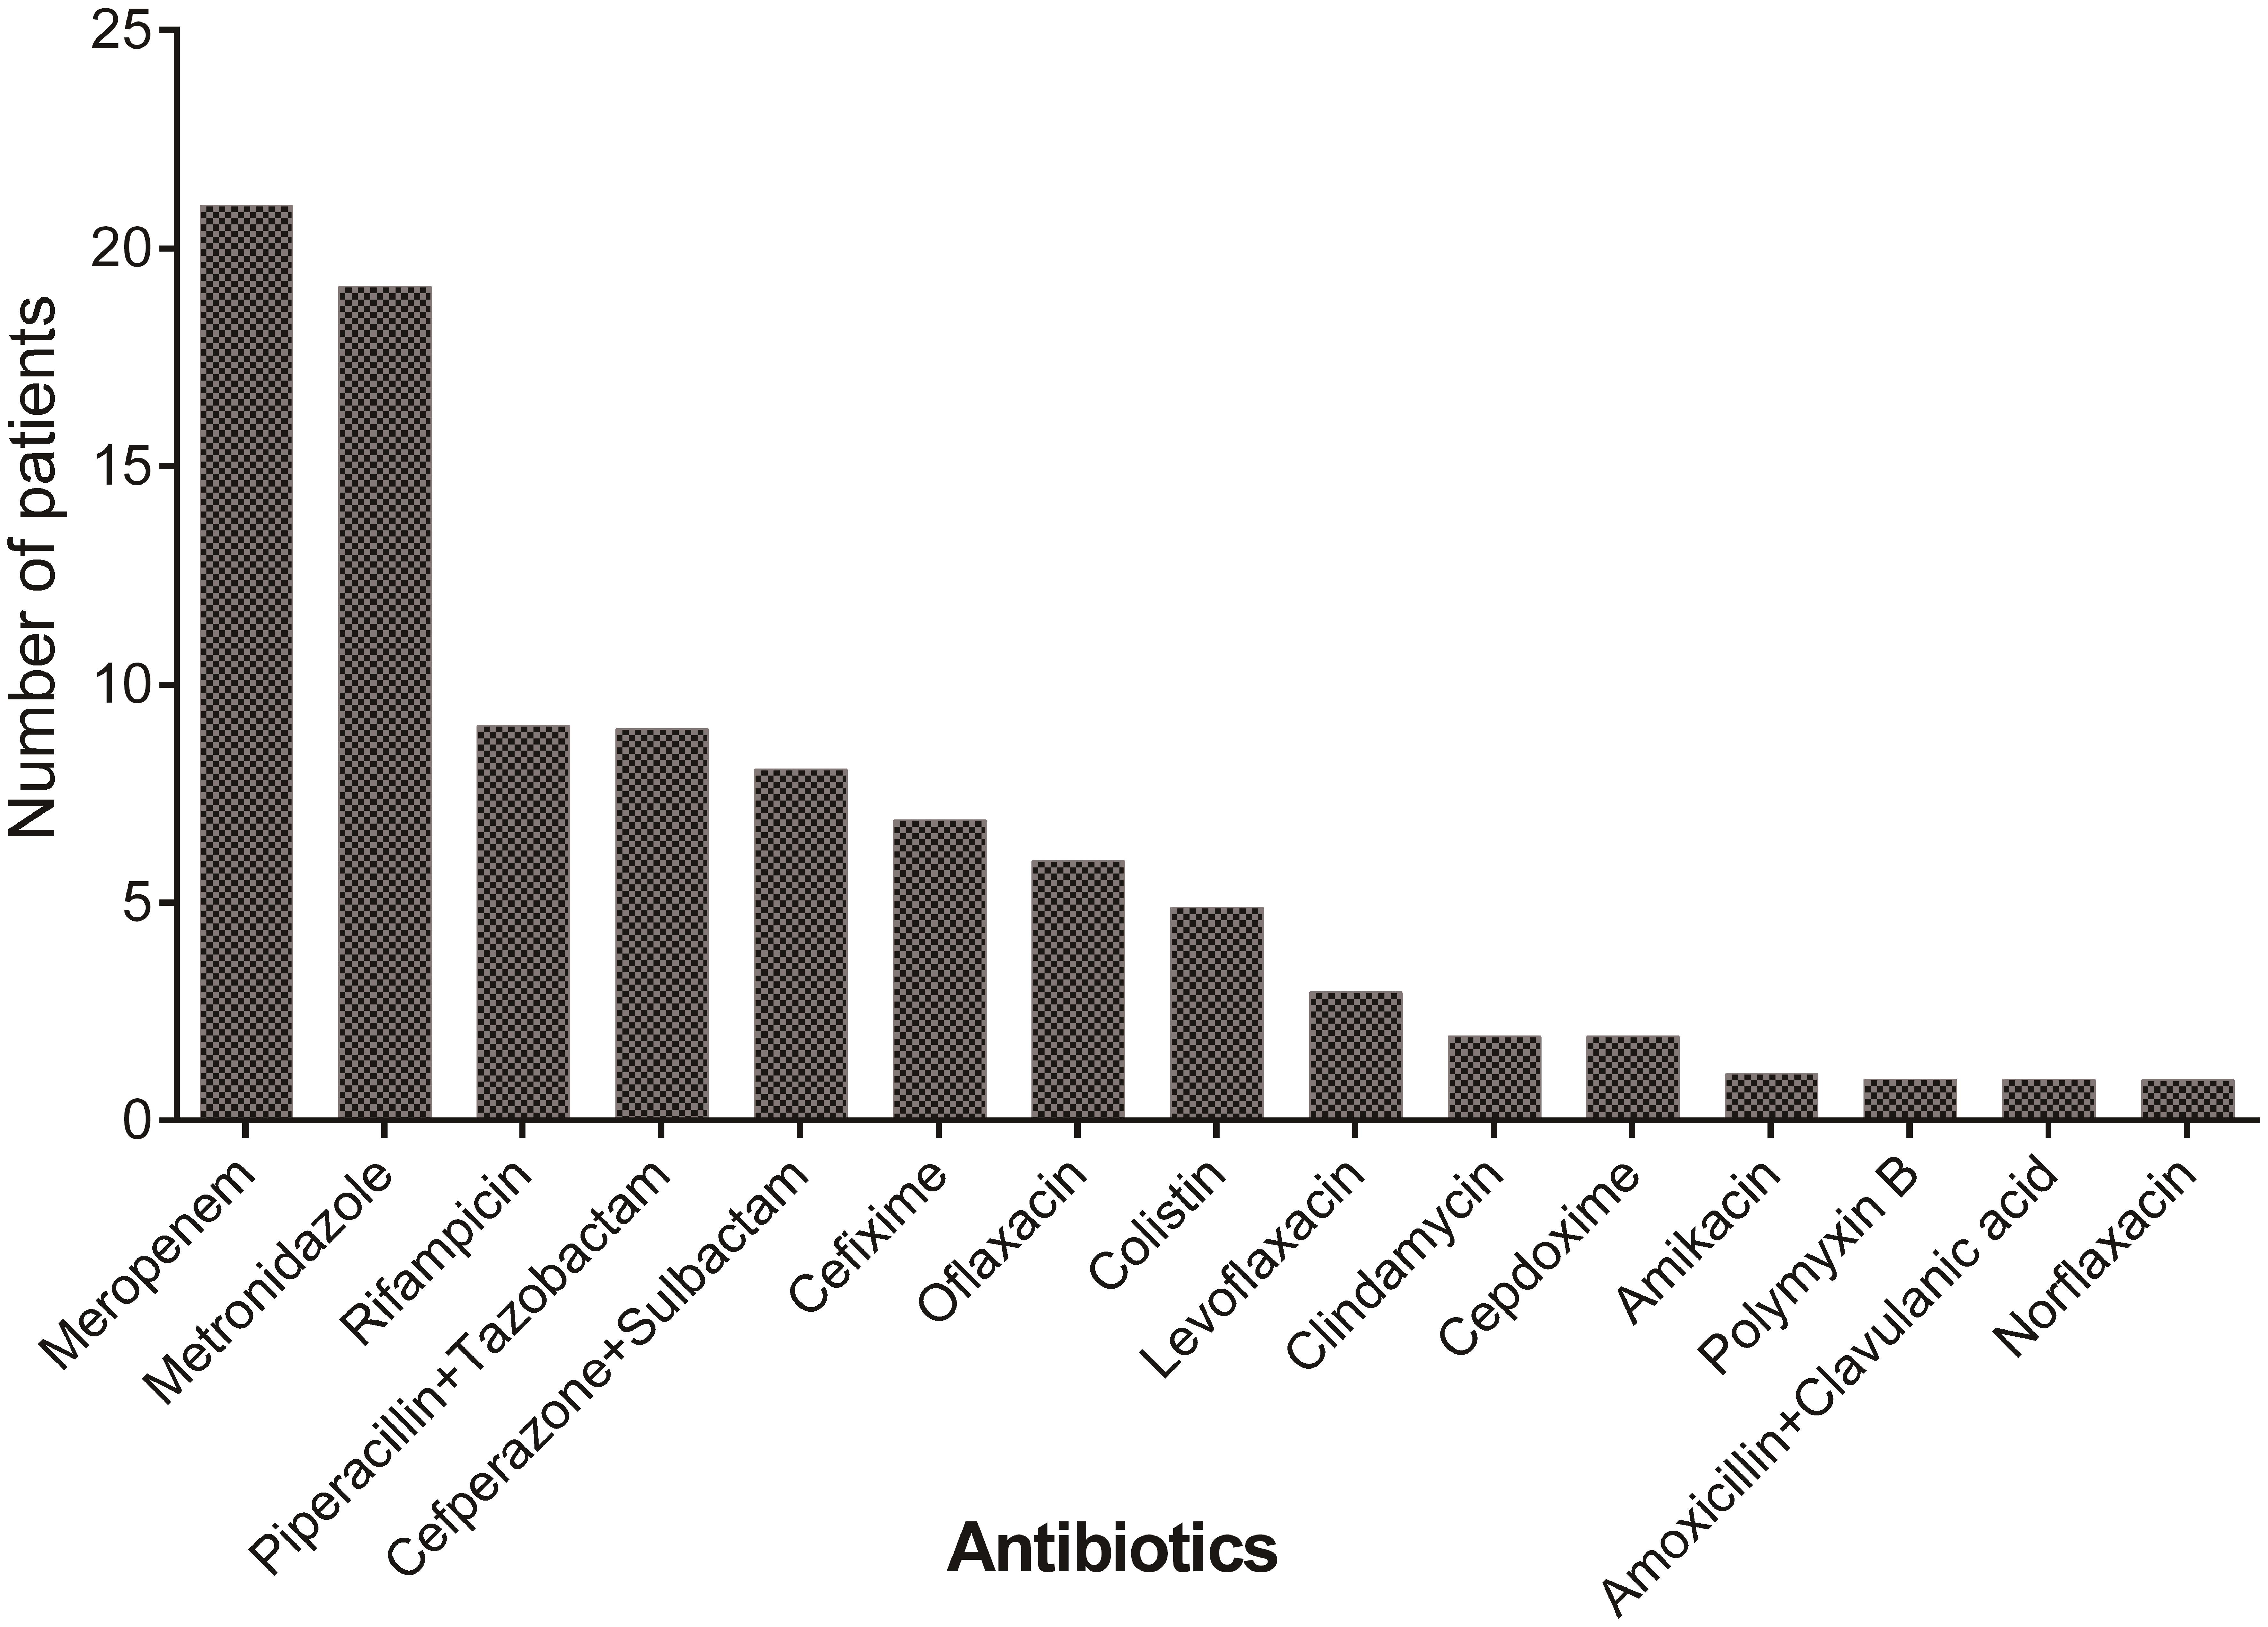 Pattern and types of antibiotics prescribed in patients with cirrhosis.